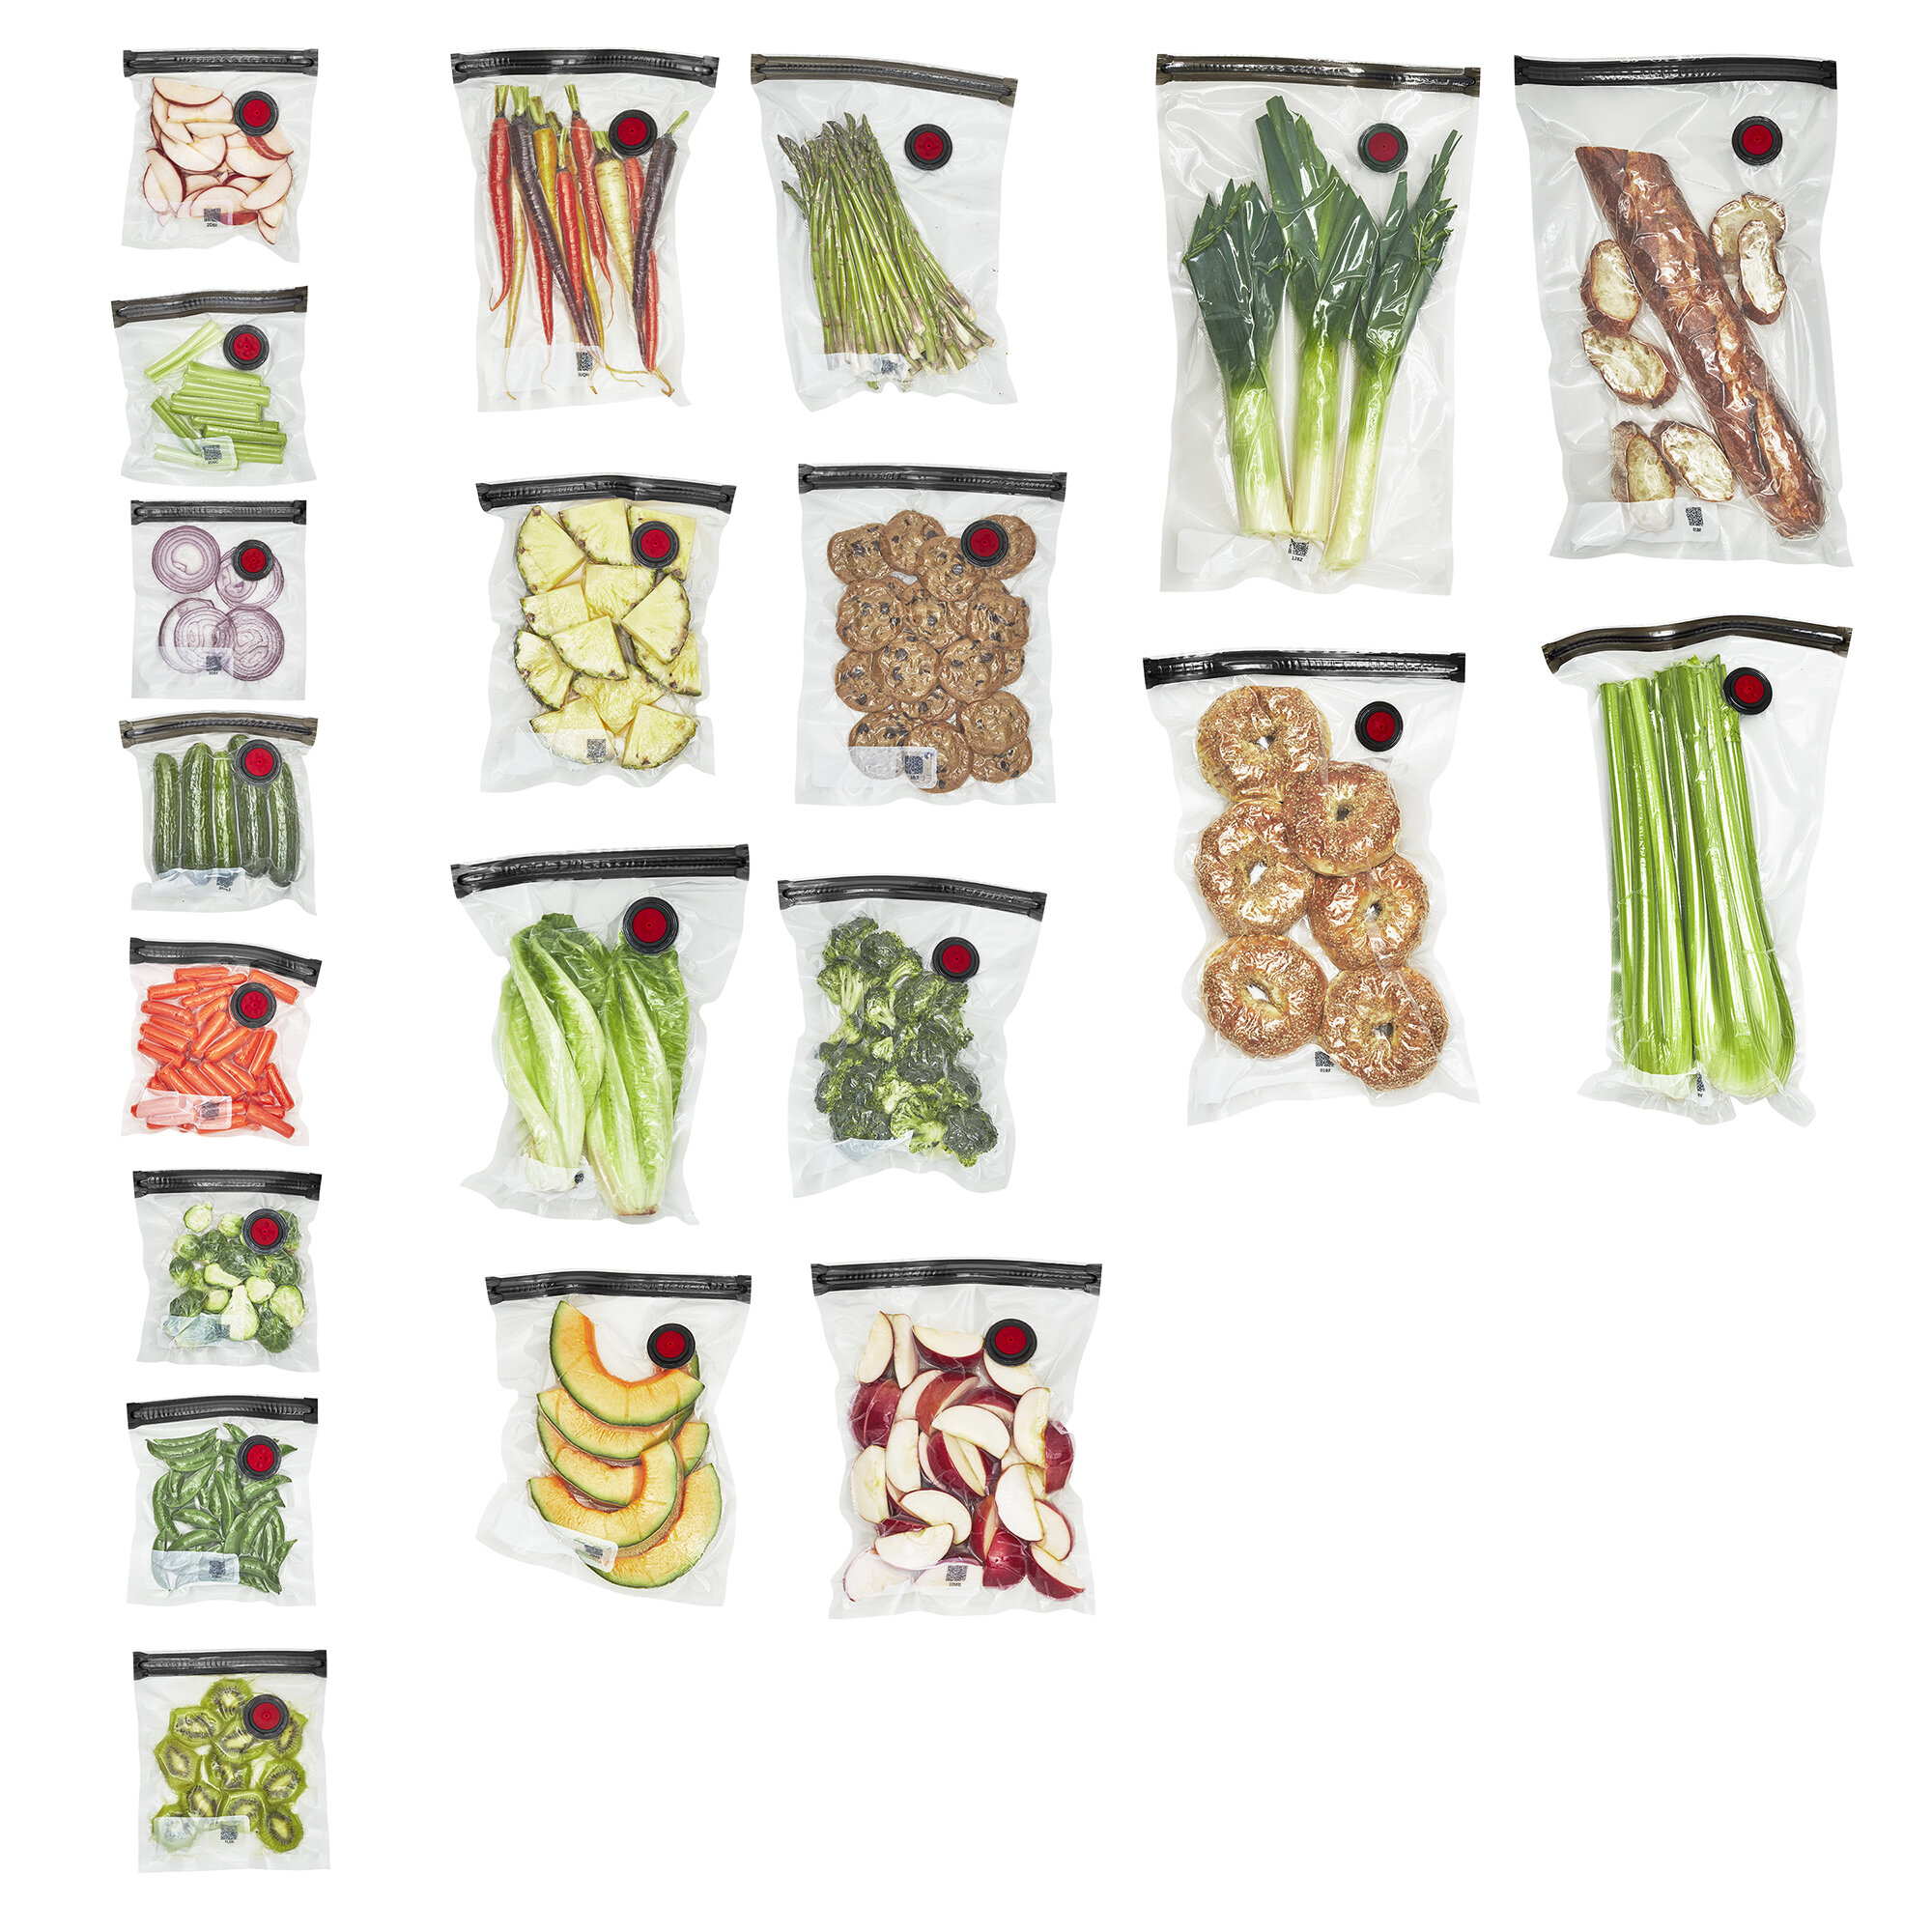 Vacuum Sealer Bag Sizes [What You Need to Know]